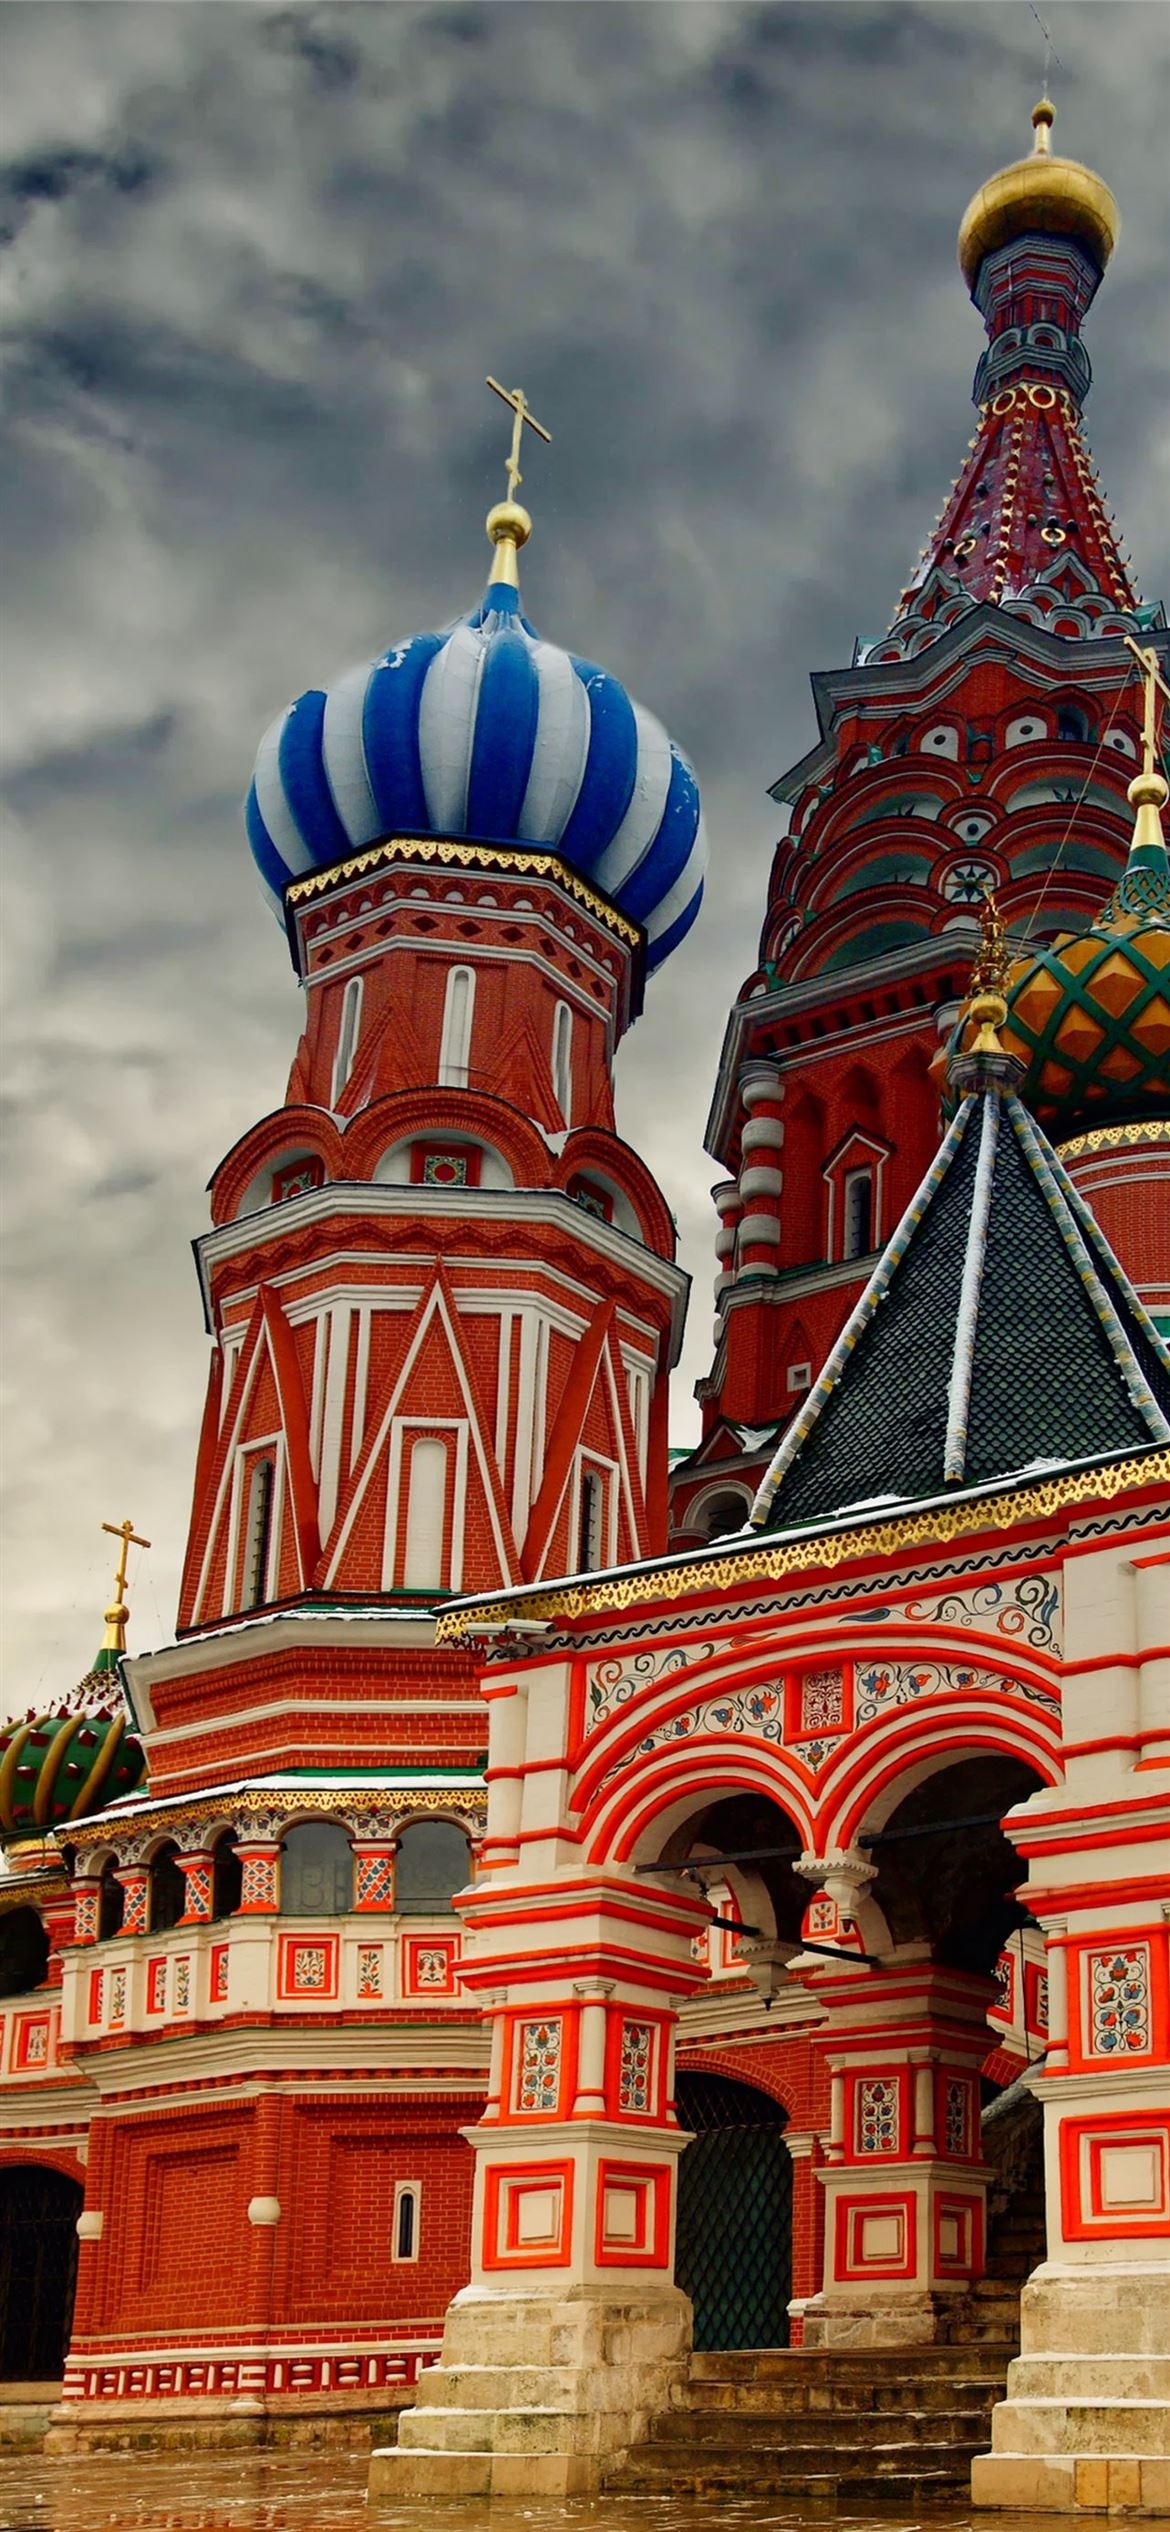 Saint Basil's, Travels, Red Square iPhone wallpapers, 1170x2540 HD Handy